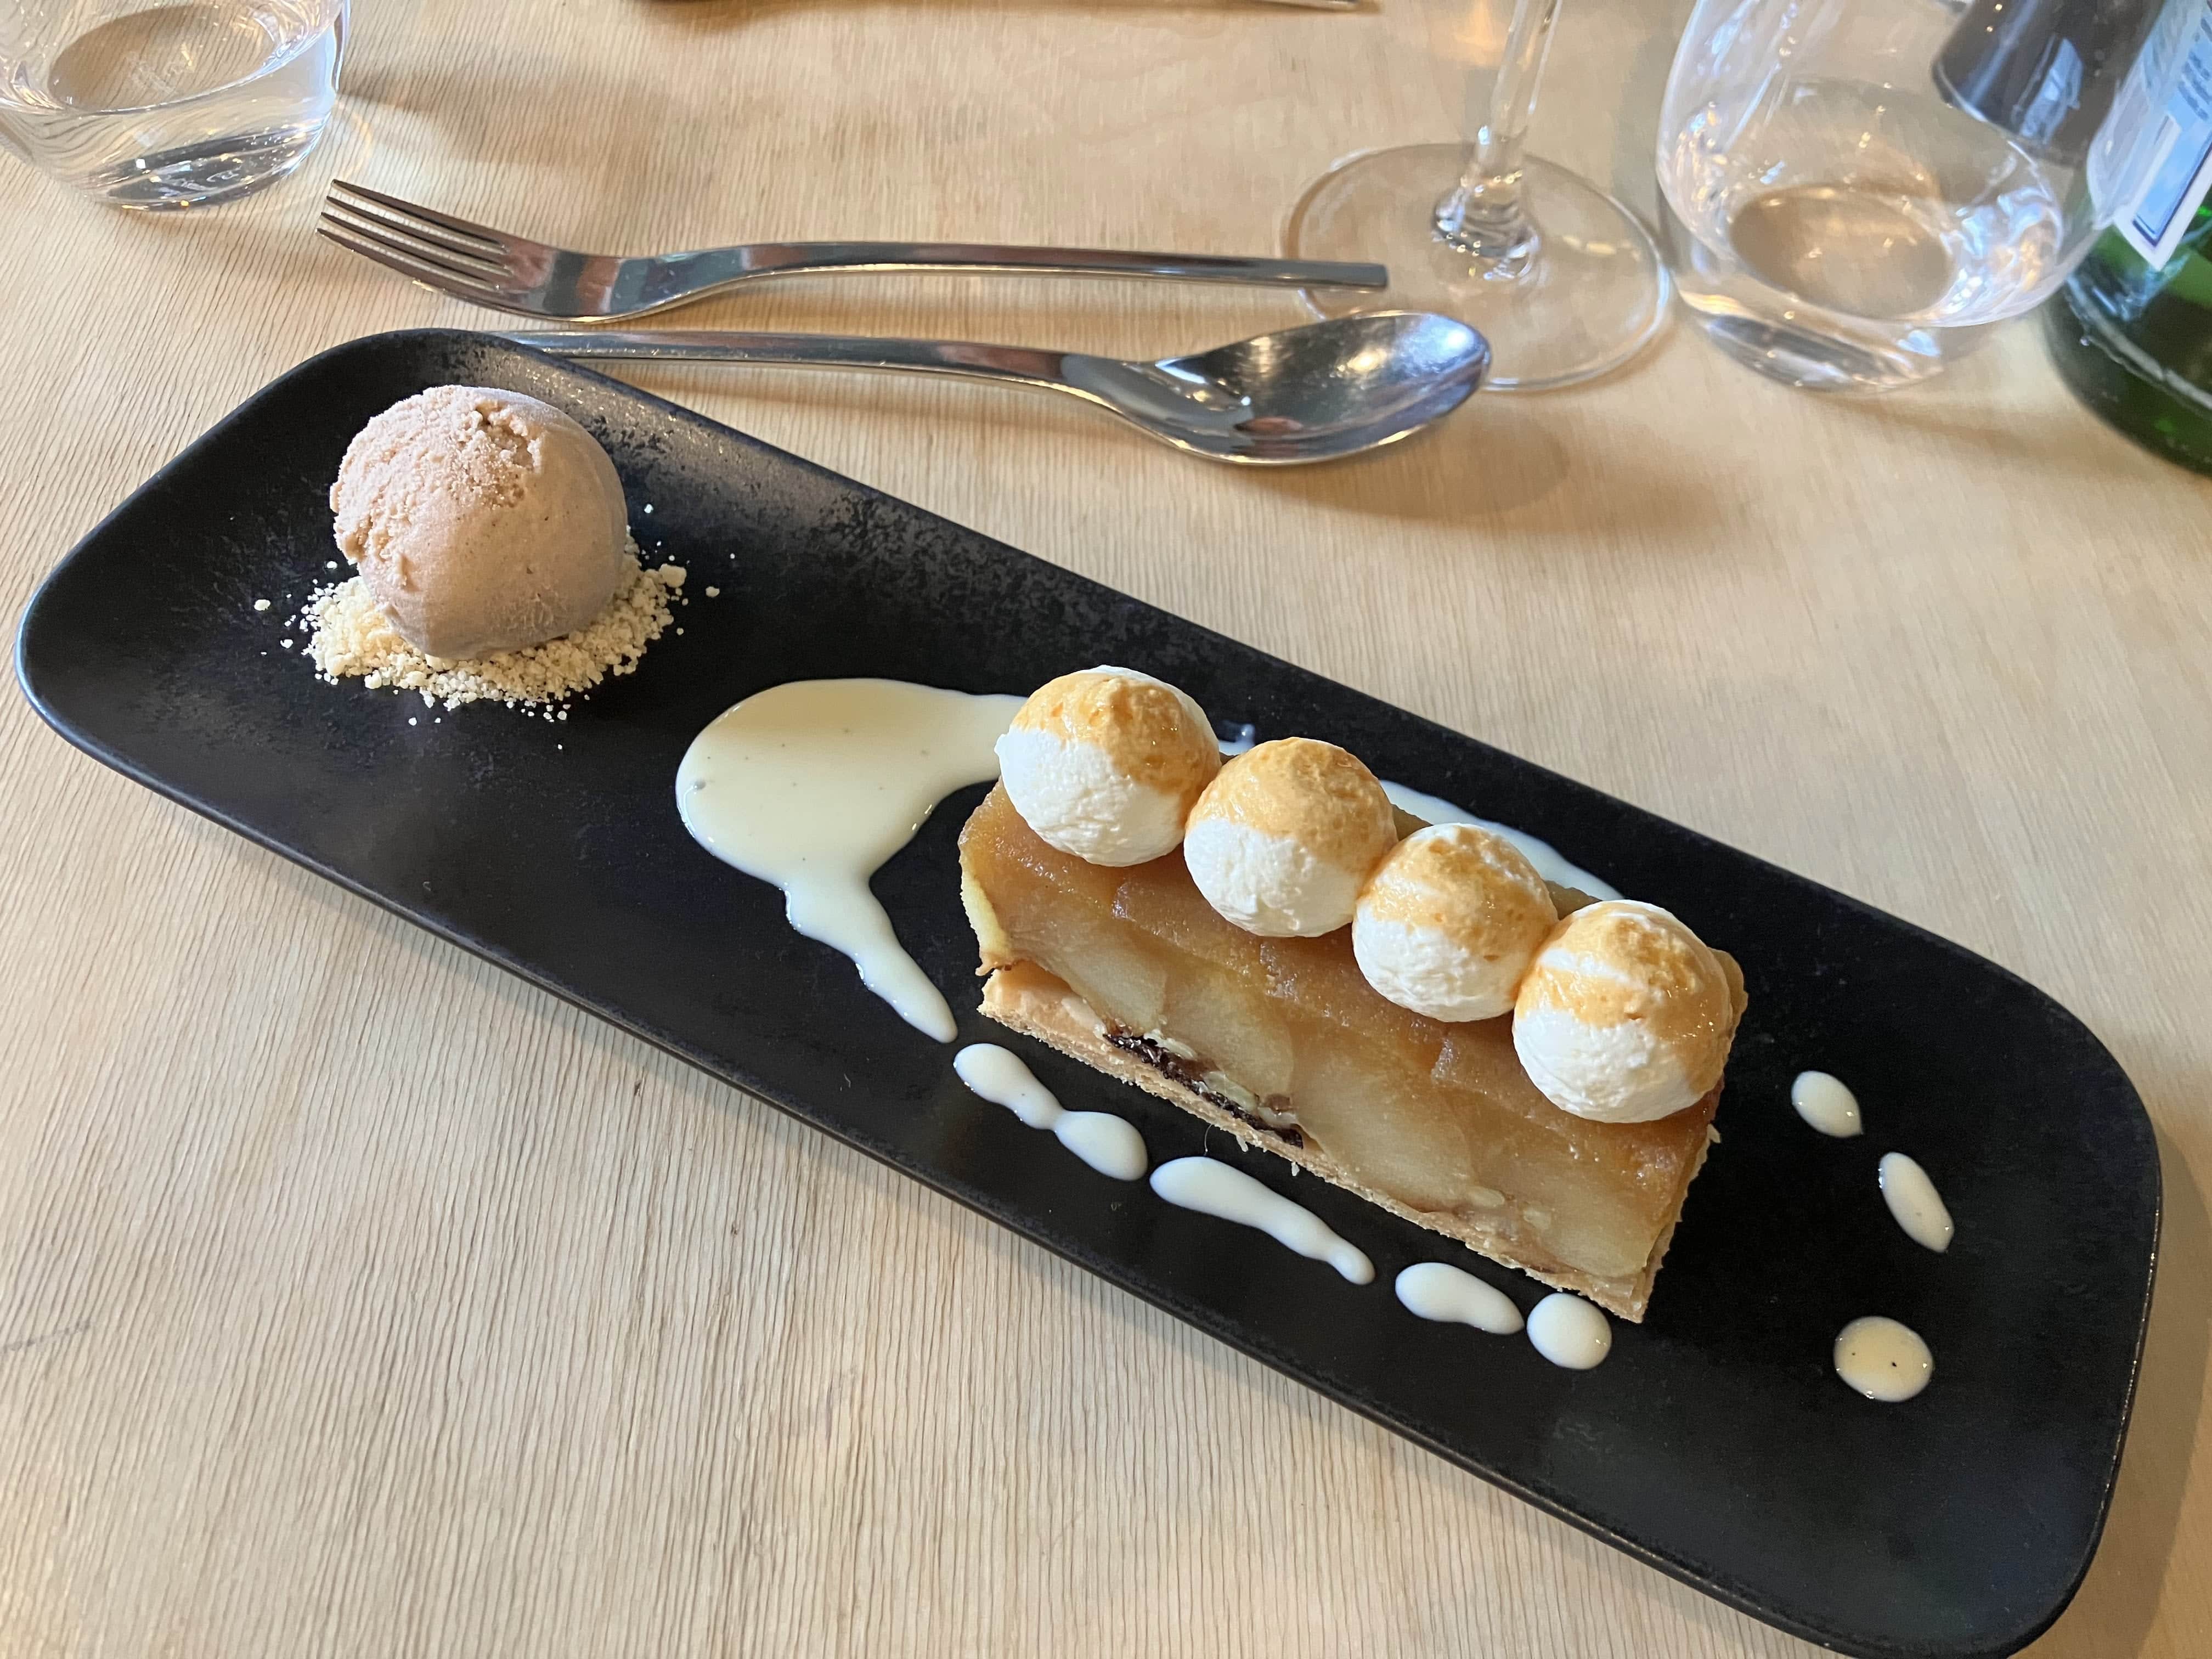 A plated apple dessert with three scoops of ice cream.